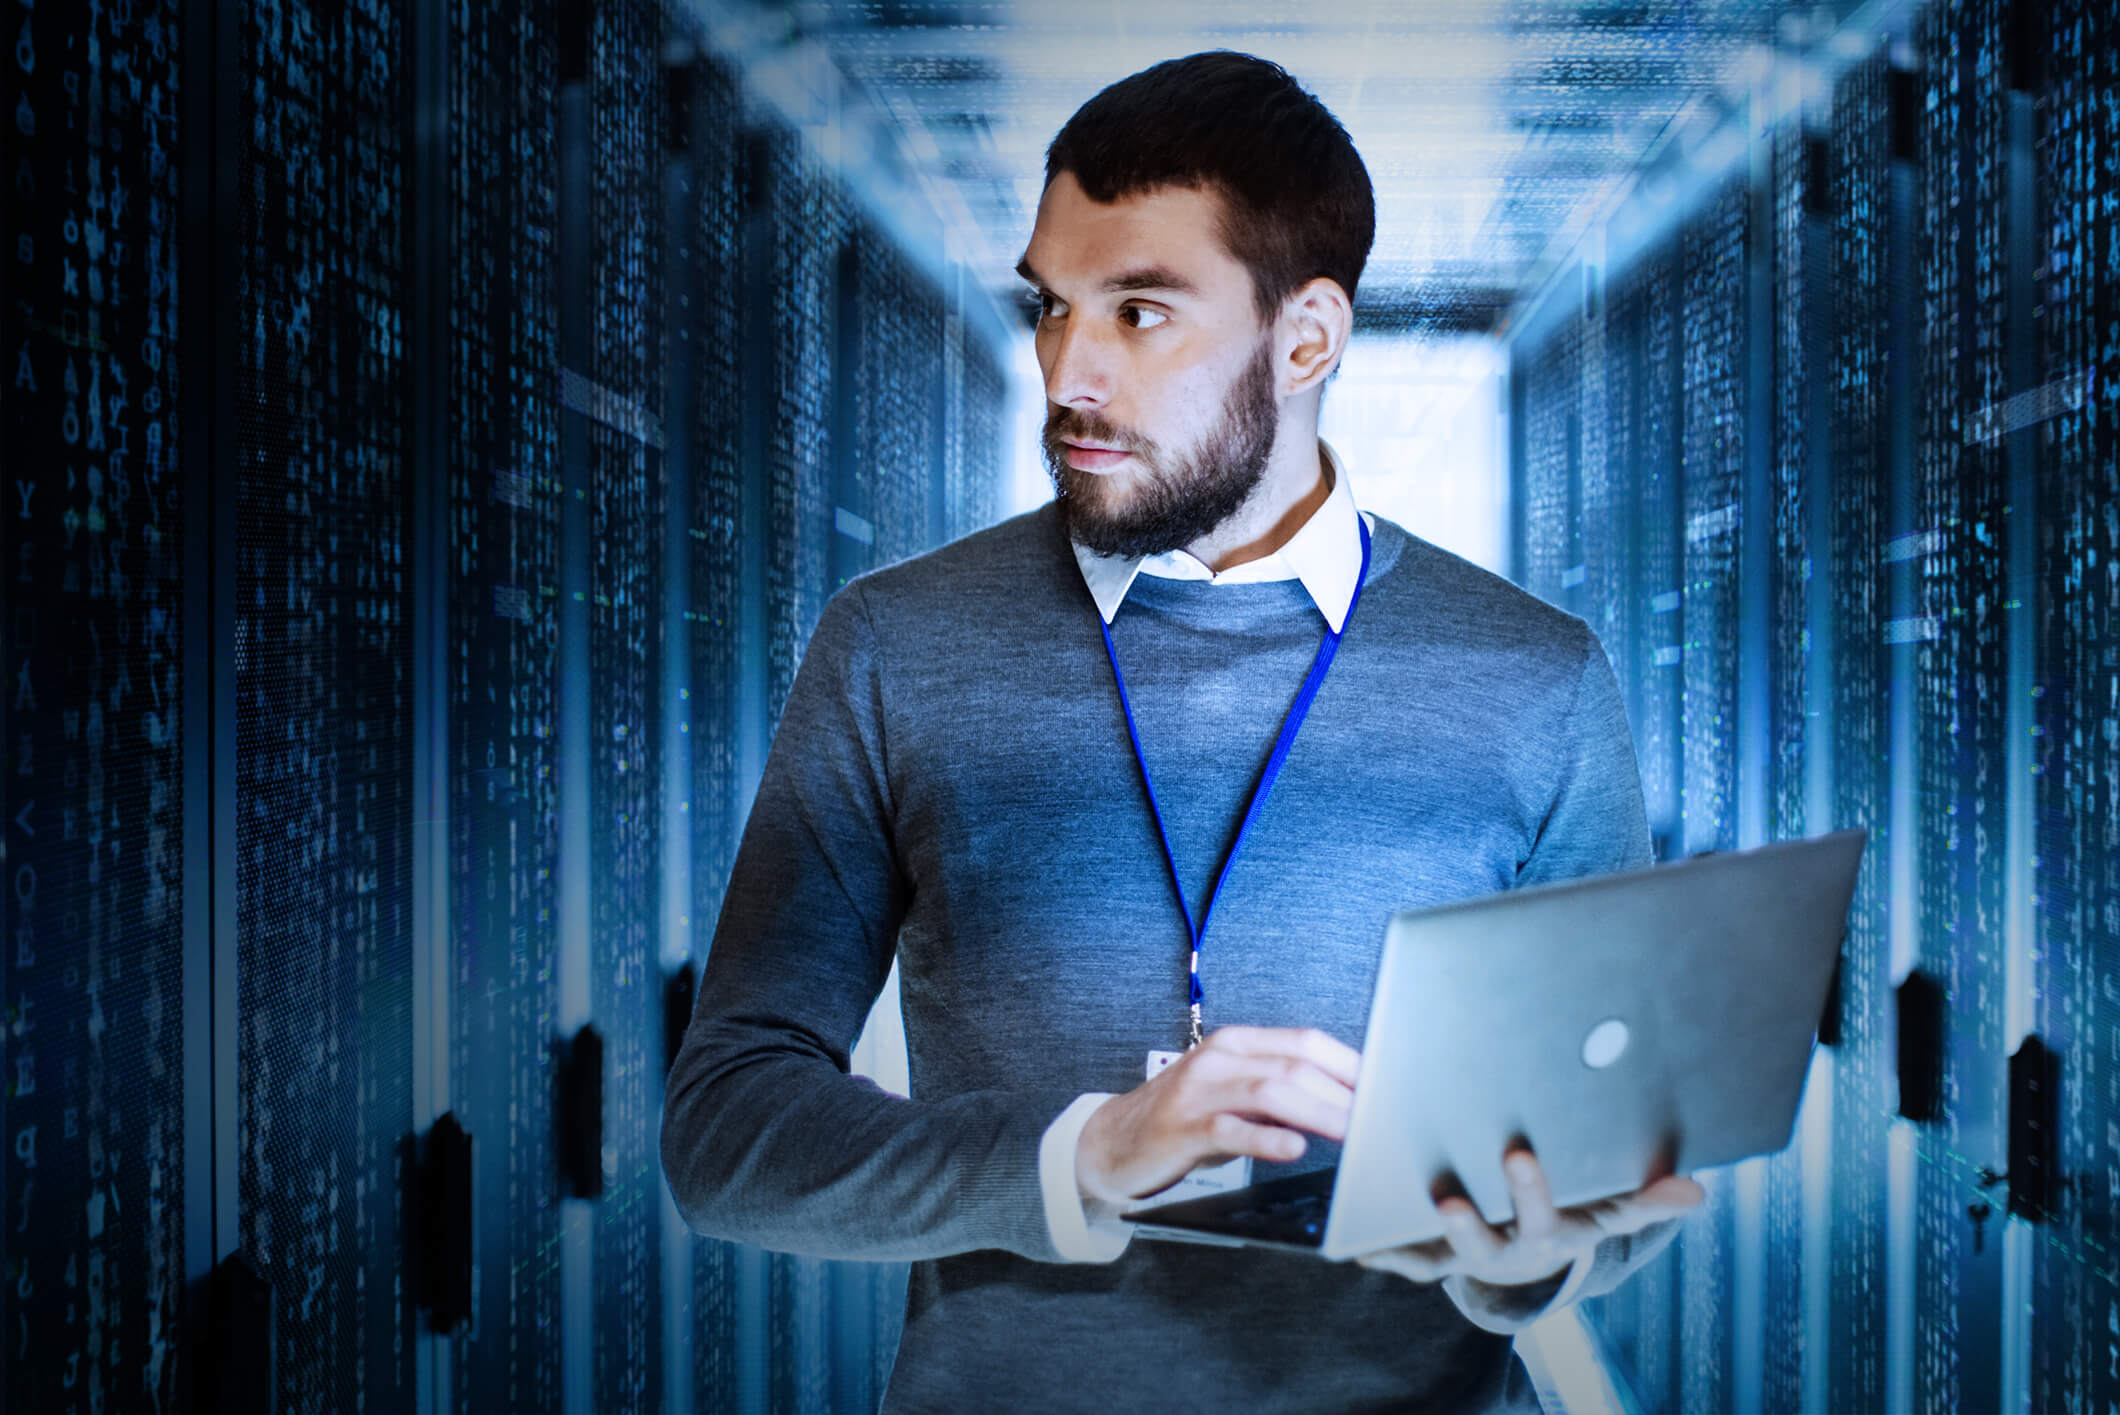 Identifying your IT skills gap and finding solutions for your organization